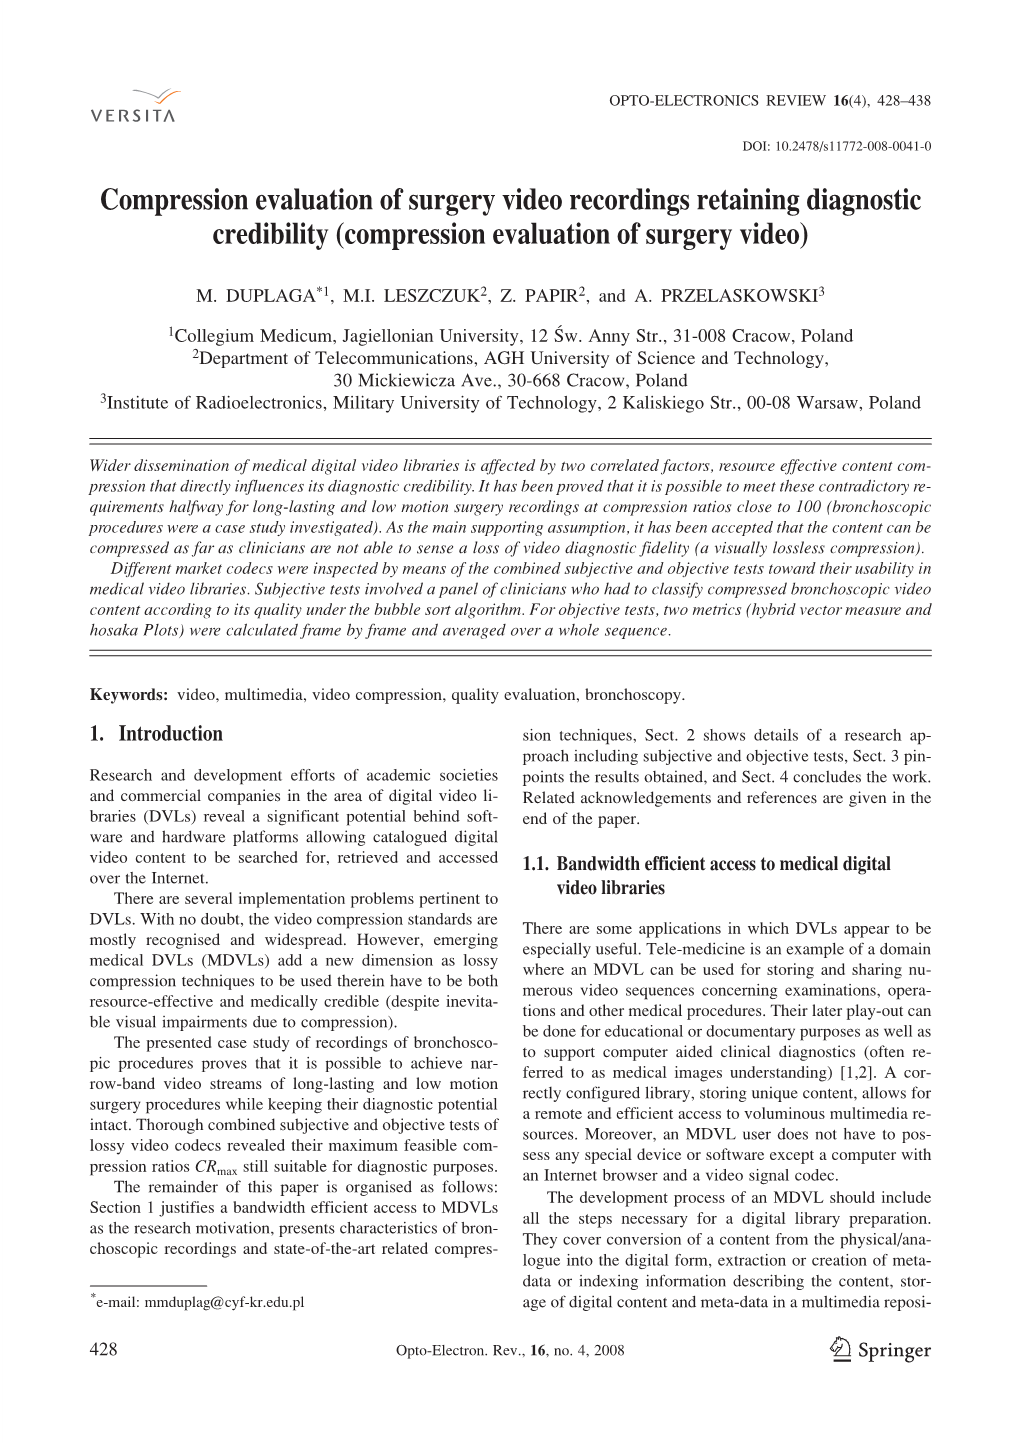 Compression Evaluation of Surgery Video Recordings Retaining Diagnostic Credibility (Compression Evaluation of Surgery Video)